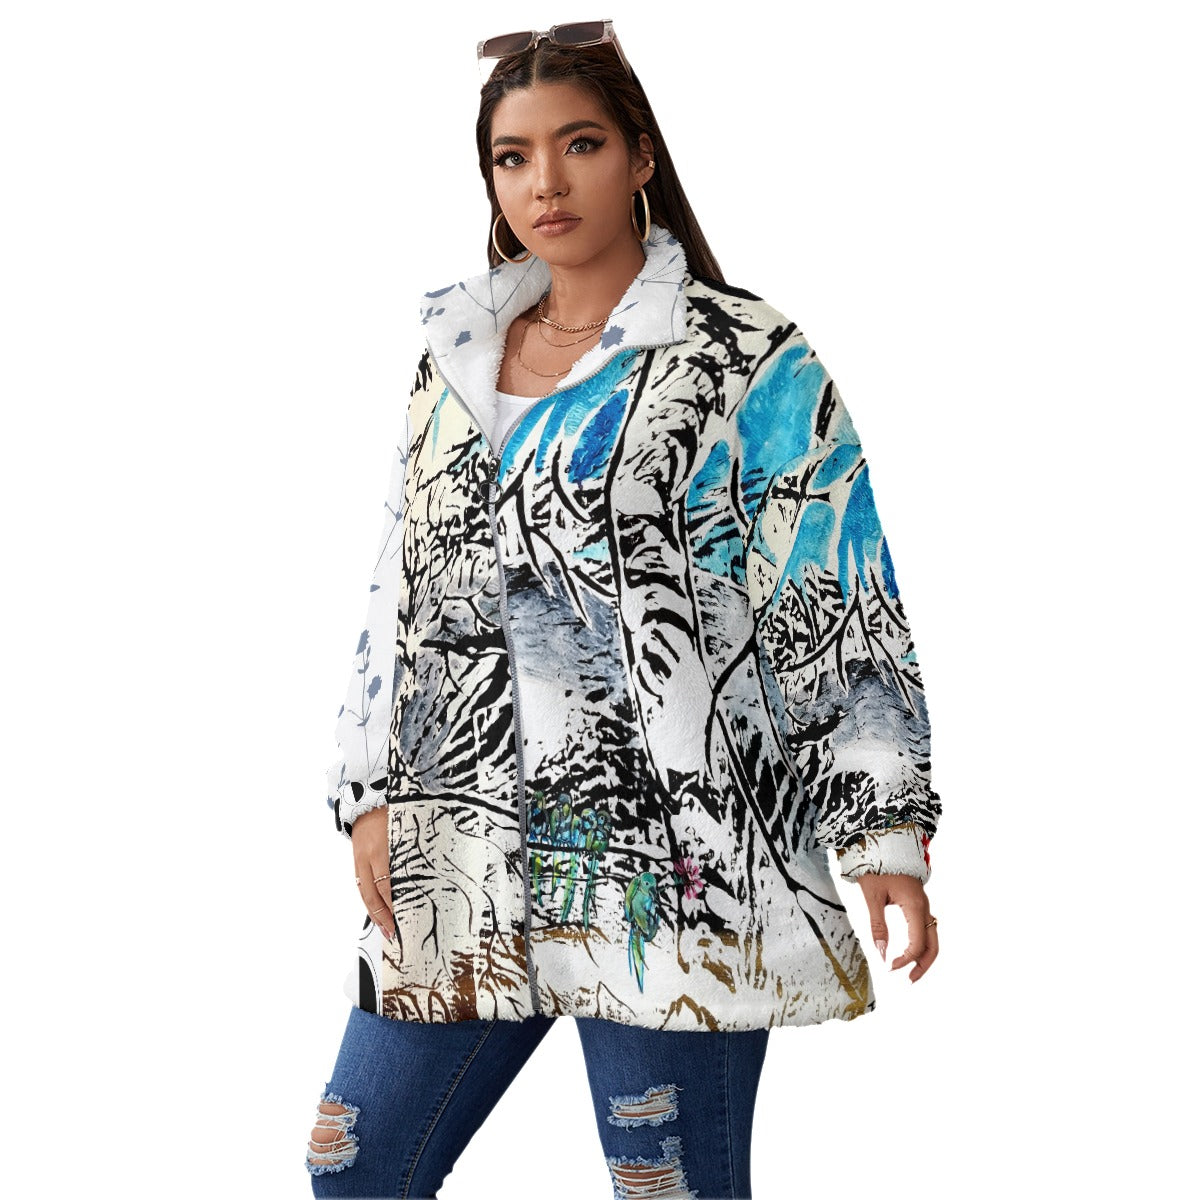 All-Over Print Women's Borg Fleece Stand-up Collar Coat With Zipper Closure(Plus Size)